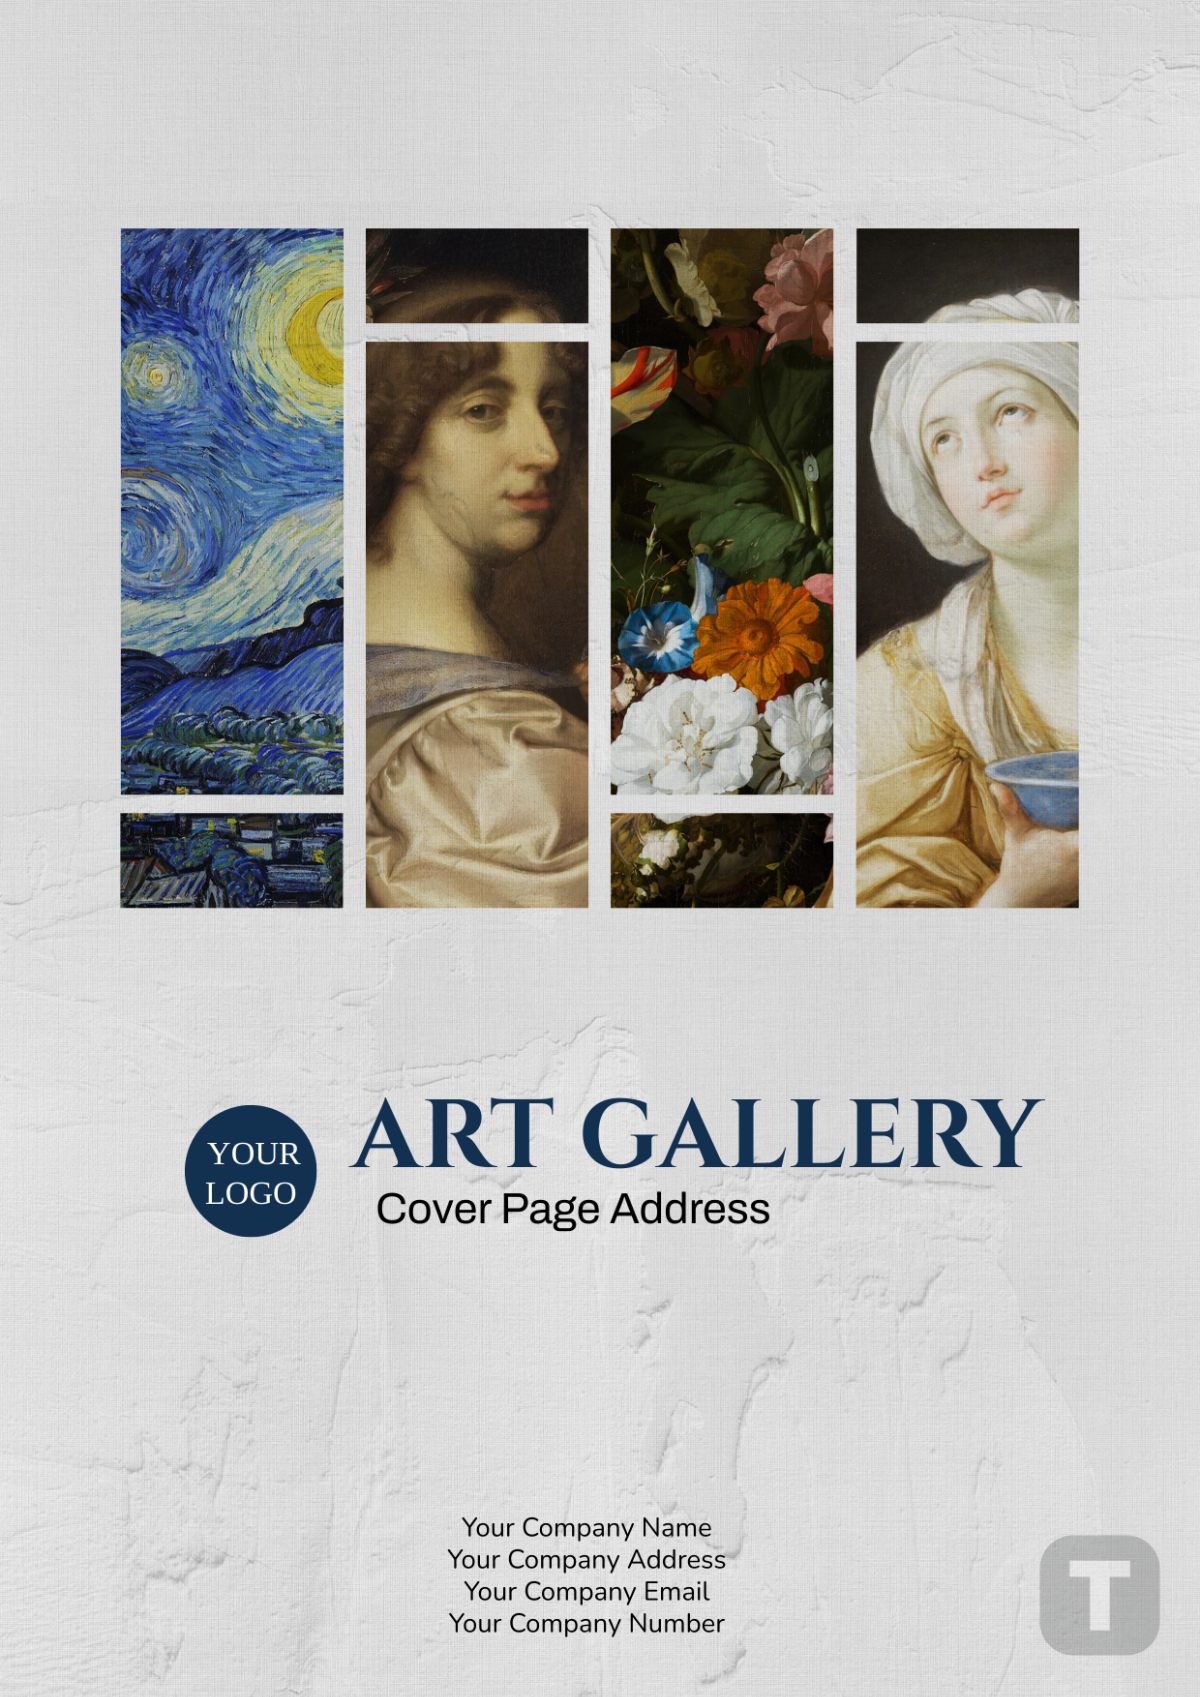 Art Gallery Cover Page Address